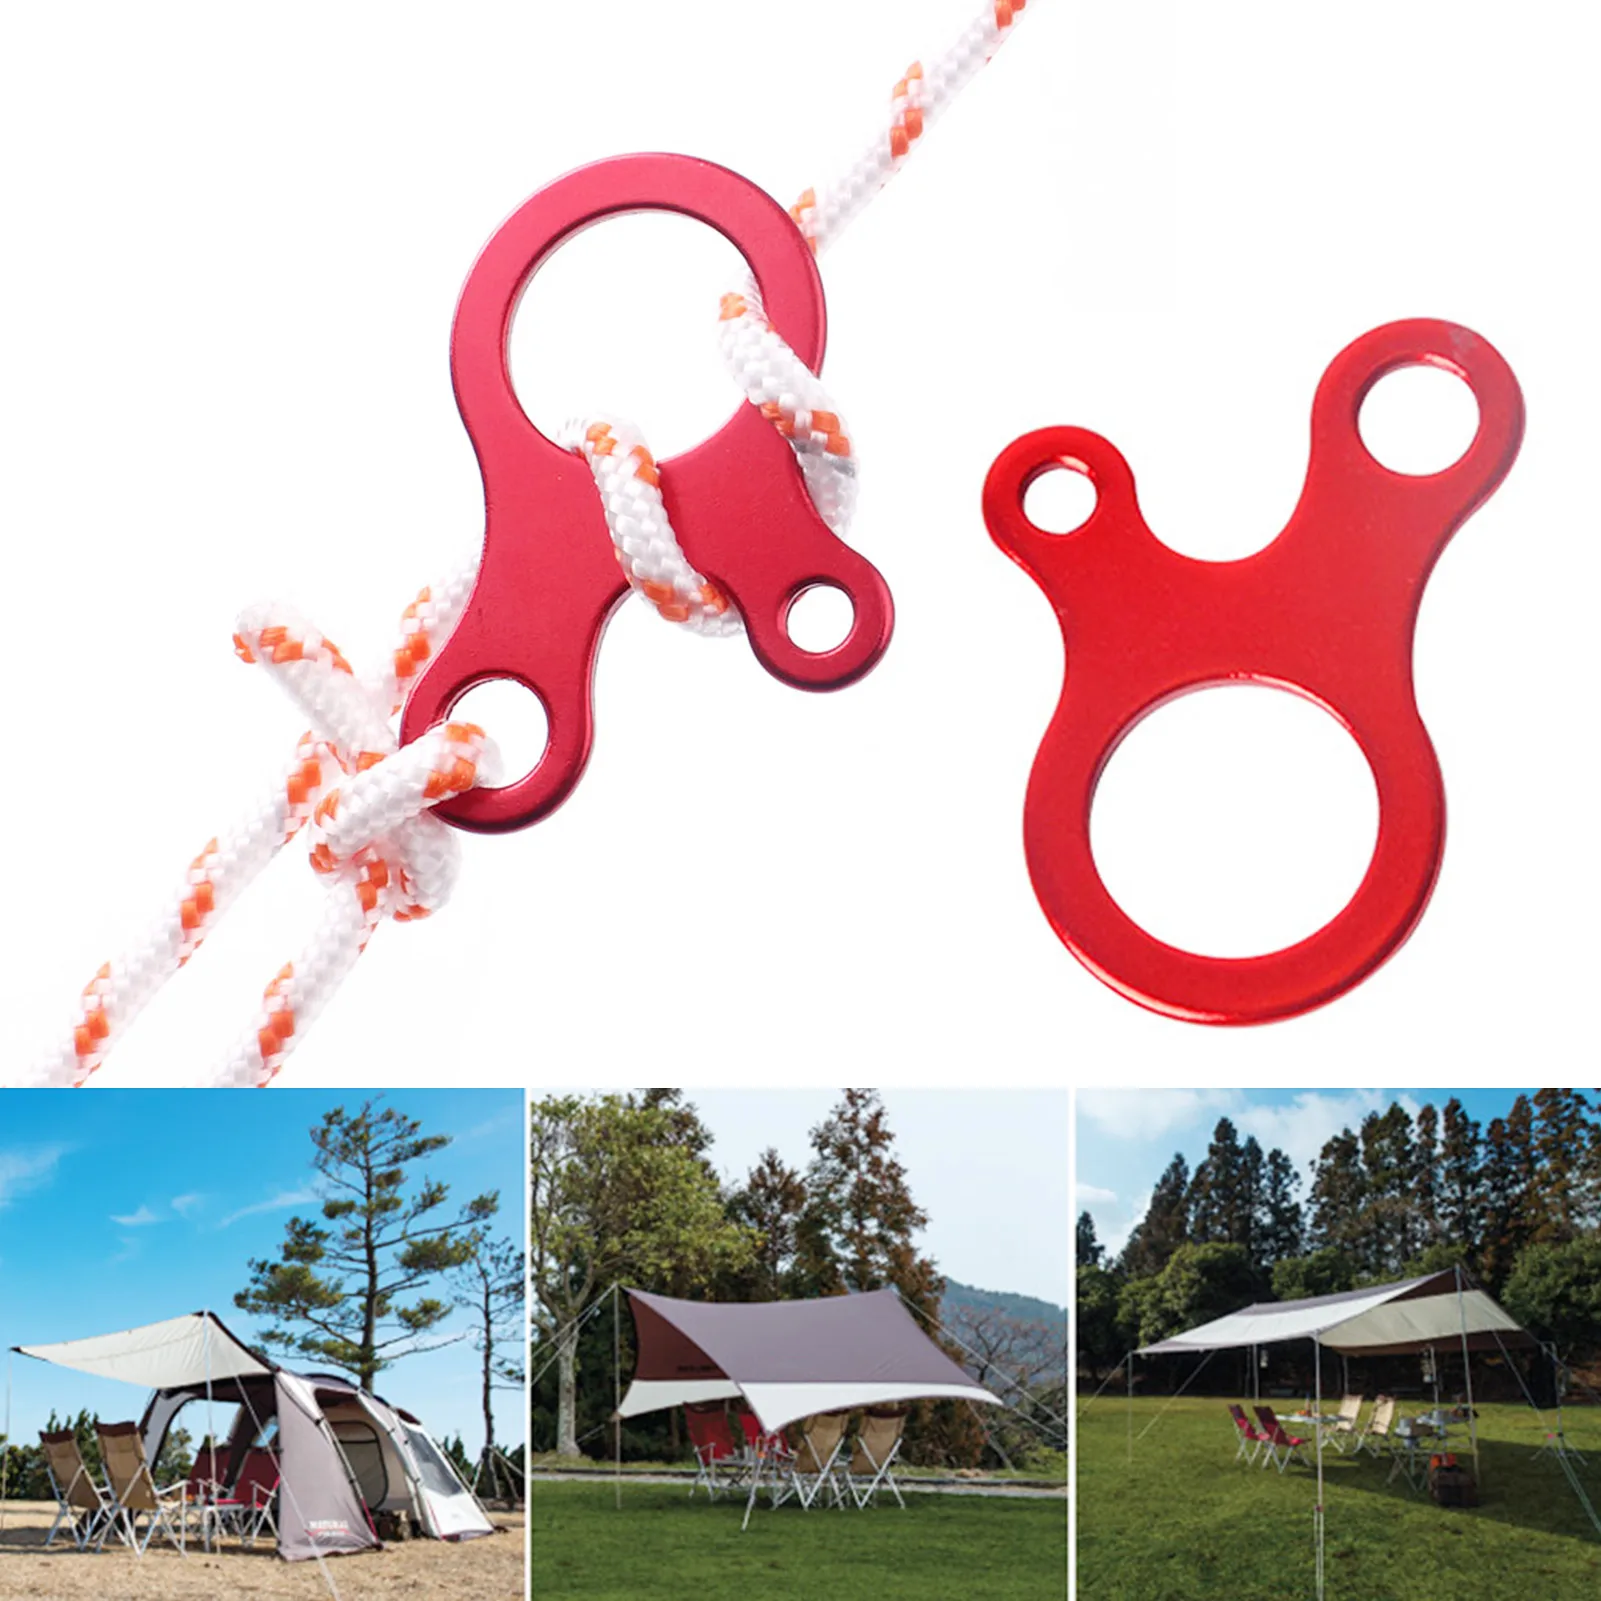 https://ae01.alicdn.com/kf/Sd0df102d744f4f74b349294d7c77e6f0M/10Pcs-Aluminum-Alloy-Rope-Tensioner-Camping-Tent-Guy-Line-Cord-Adjuster-Windproof-Rope-Buckle-For-Hiking.jpg